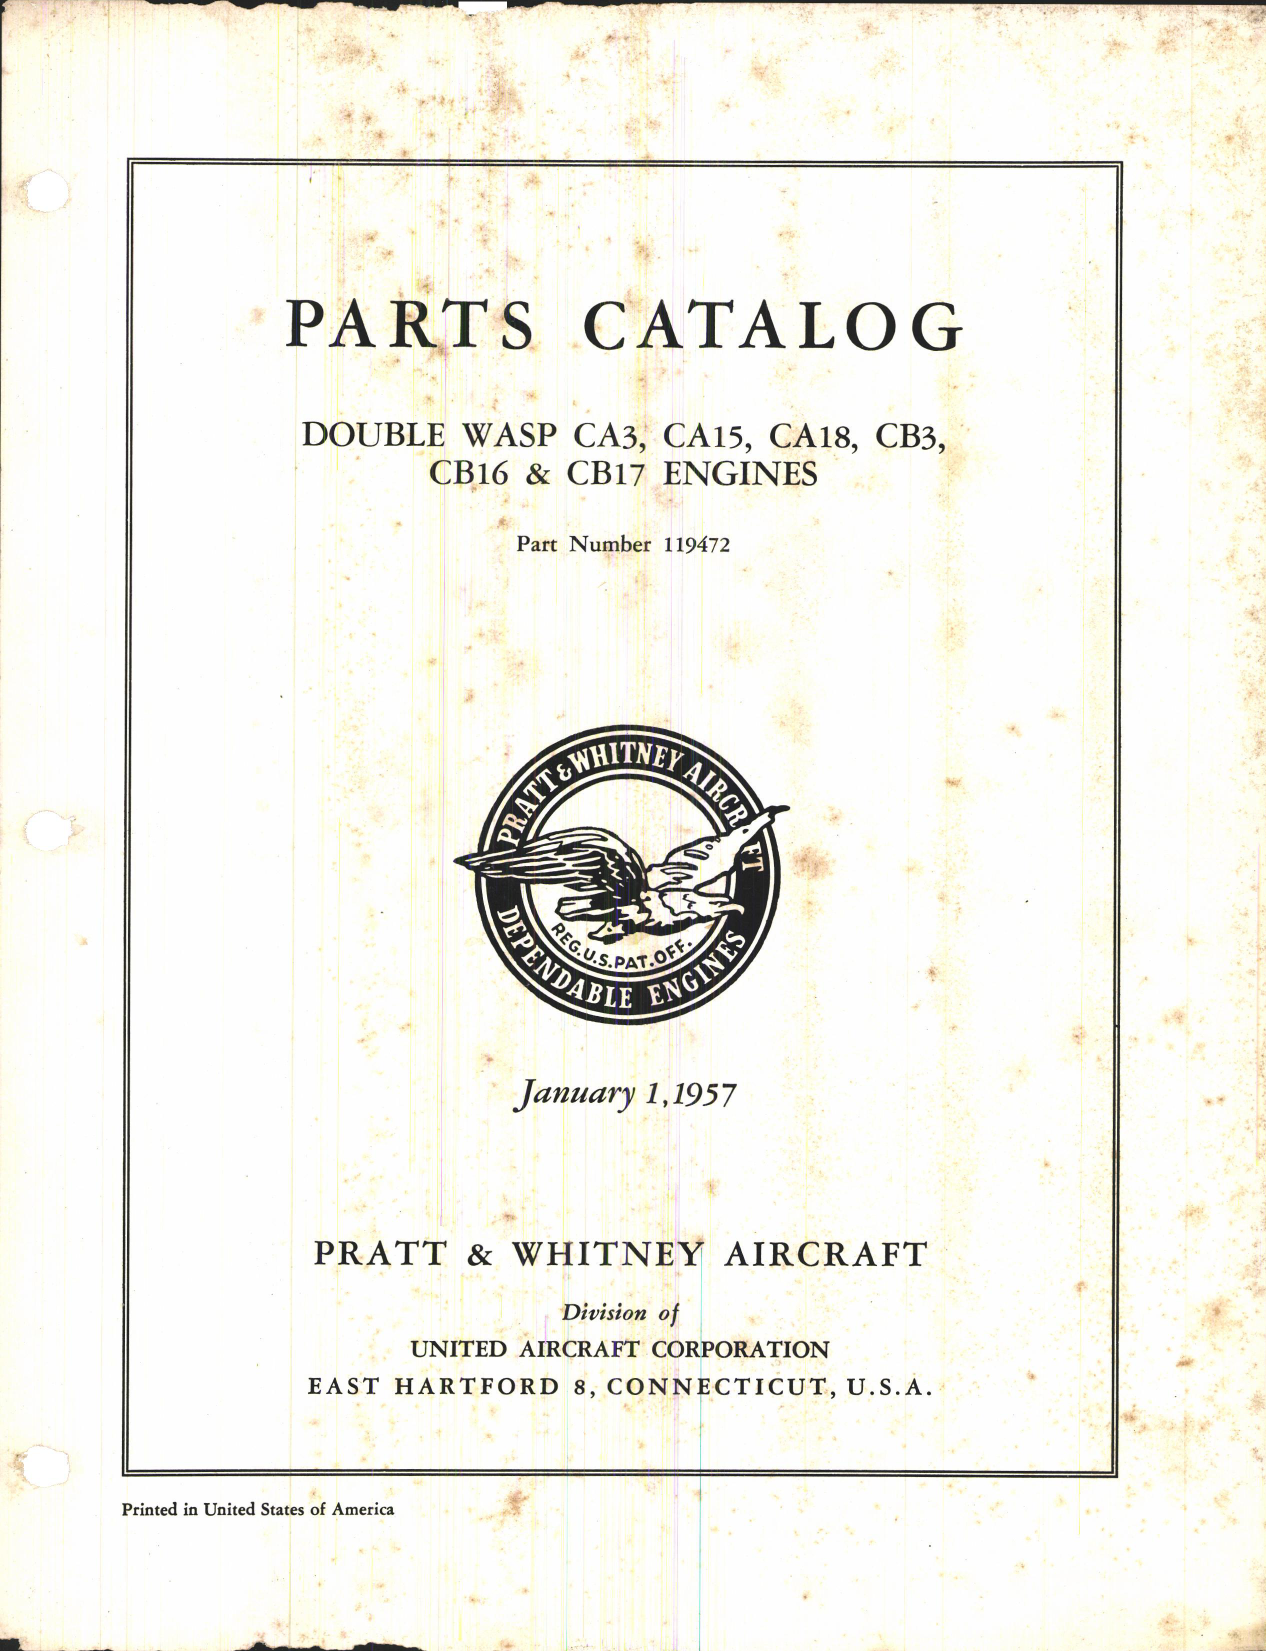 Sample page 1 from AirCorps Library document: Parts Catalog for Double Wasp CA3, CA15, CA18, CB3, CB16, & CB17 Engines